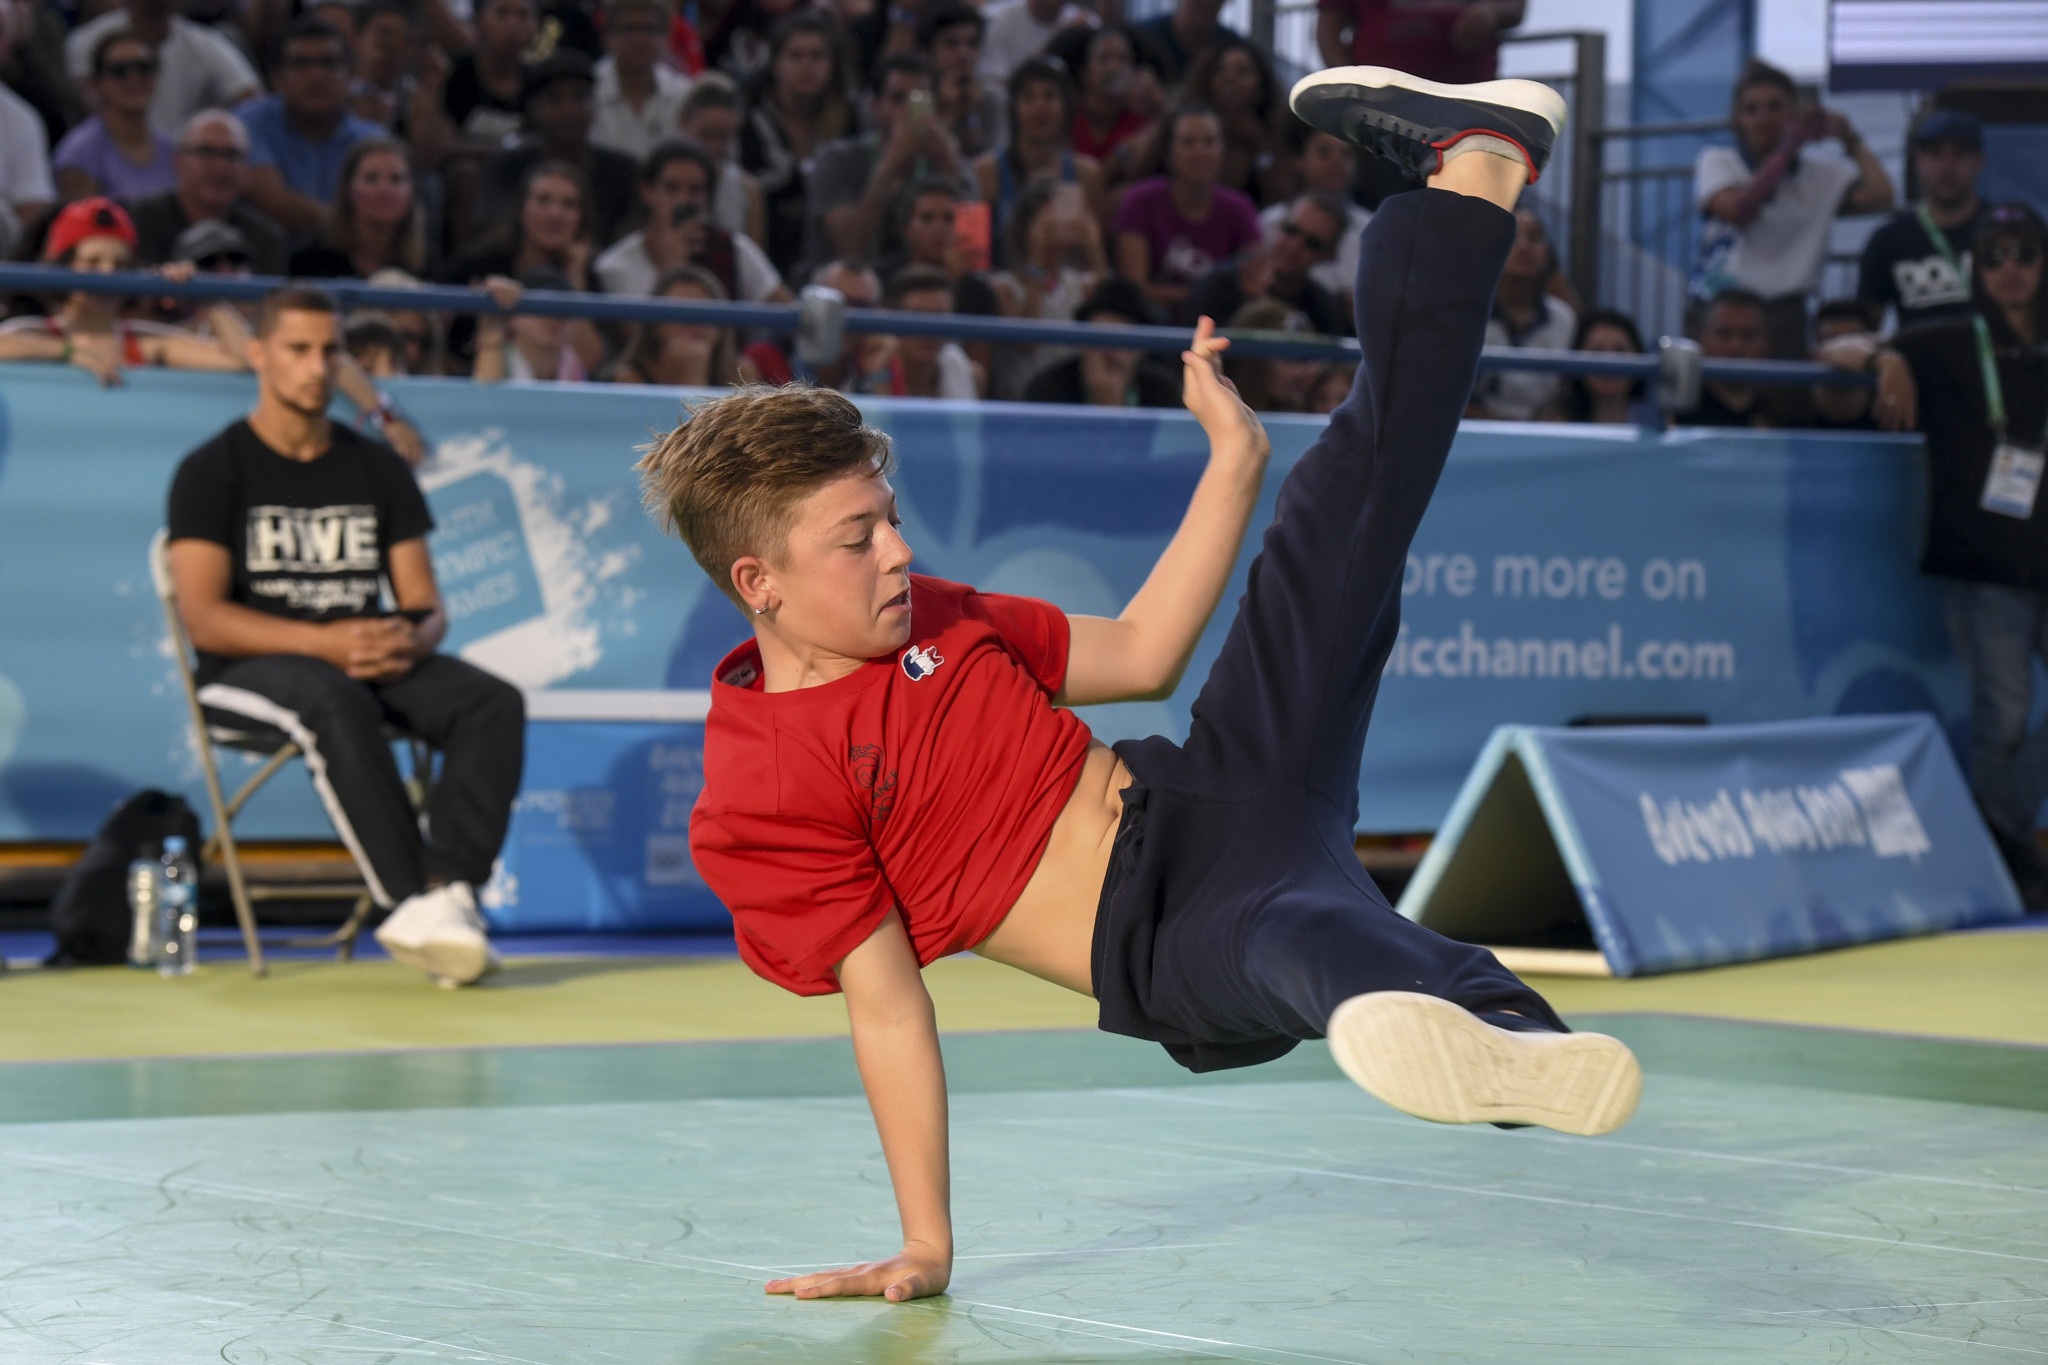 Breakingdancing featured at the Buenos Aires 2018 Youth Olympics ©Getty Images